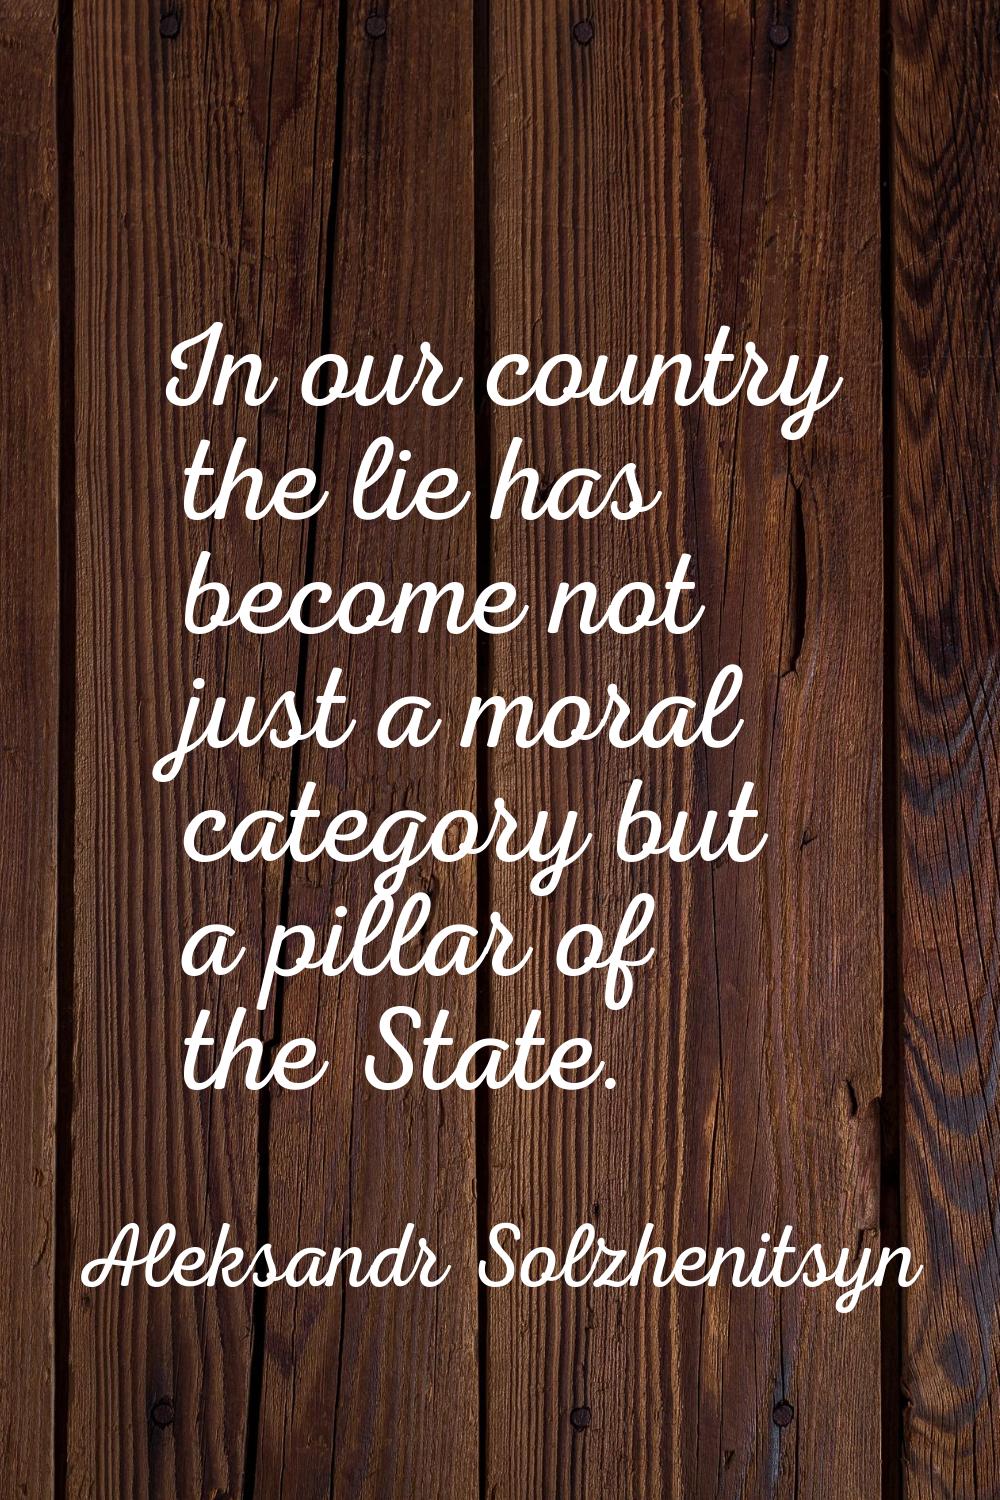 In our country the lie has become not just a moral category but a pillar of the State.